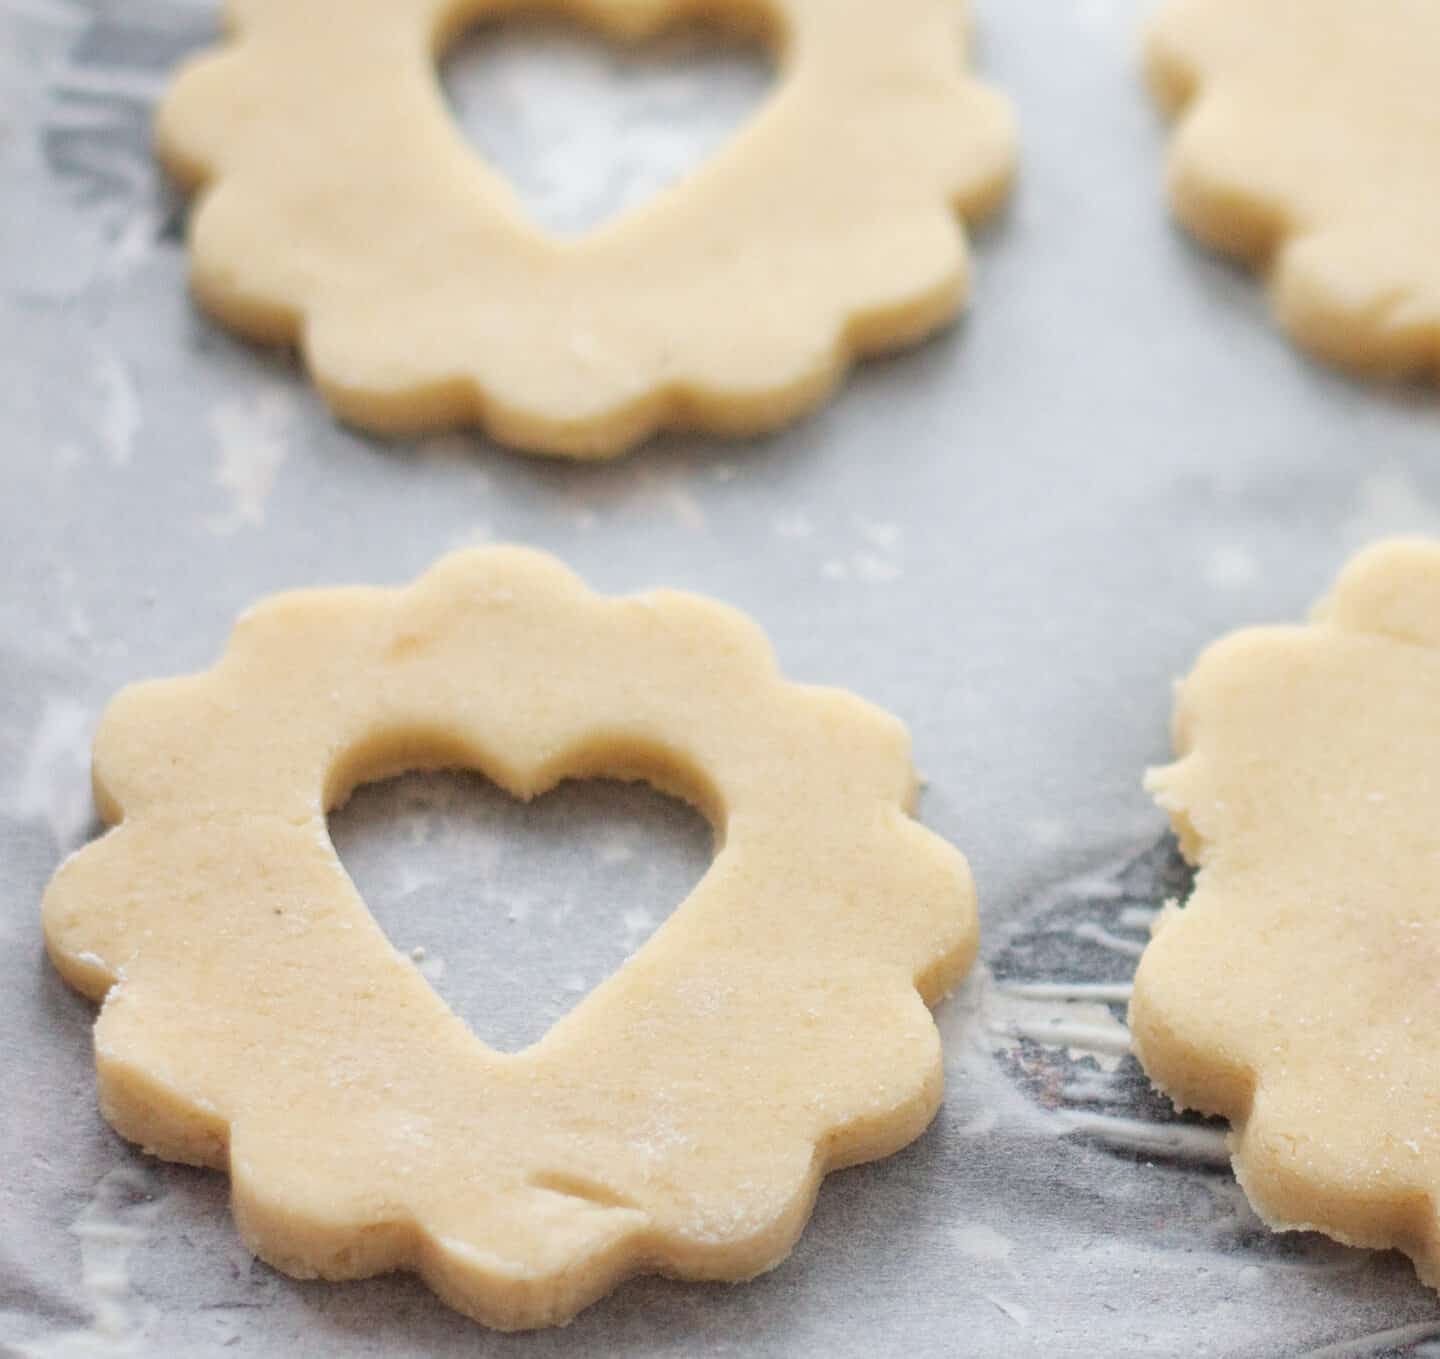 Cookie dough cut into hearts